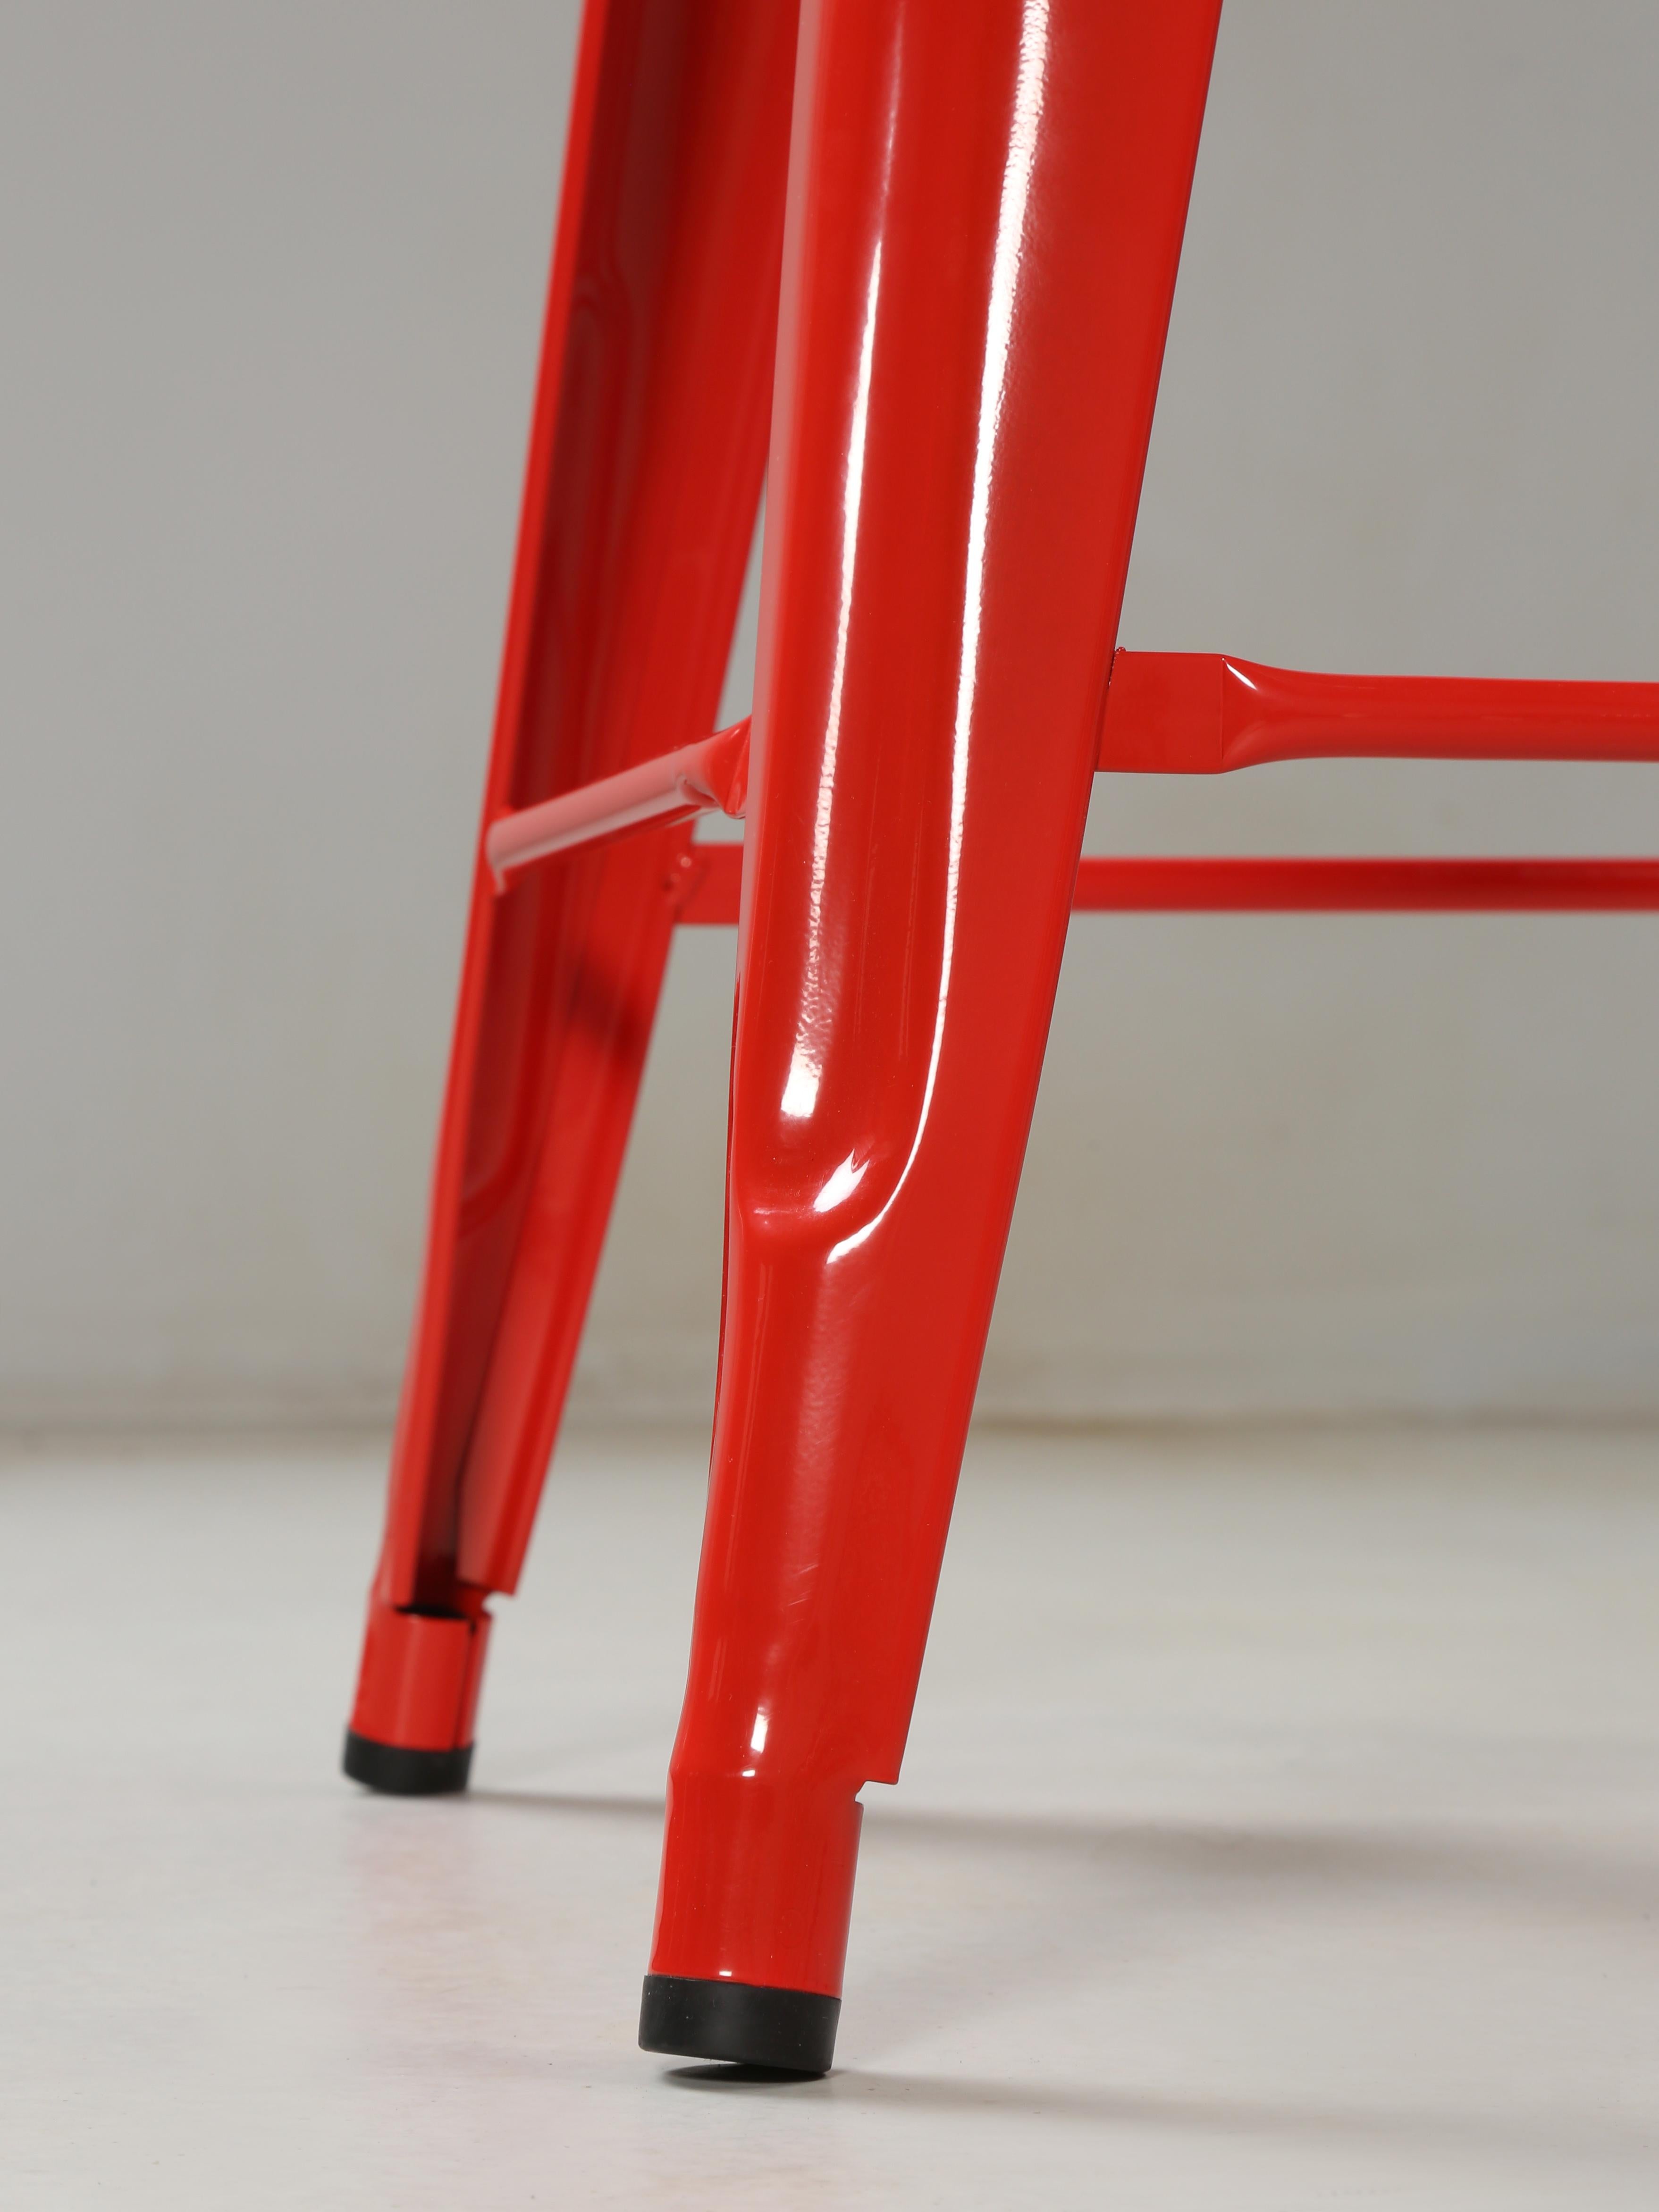 Industrial Genuine Tolix Stacking Stools 100's Showroom Samples to Choose from Most Colors